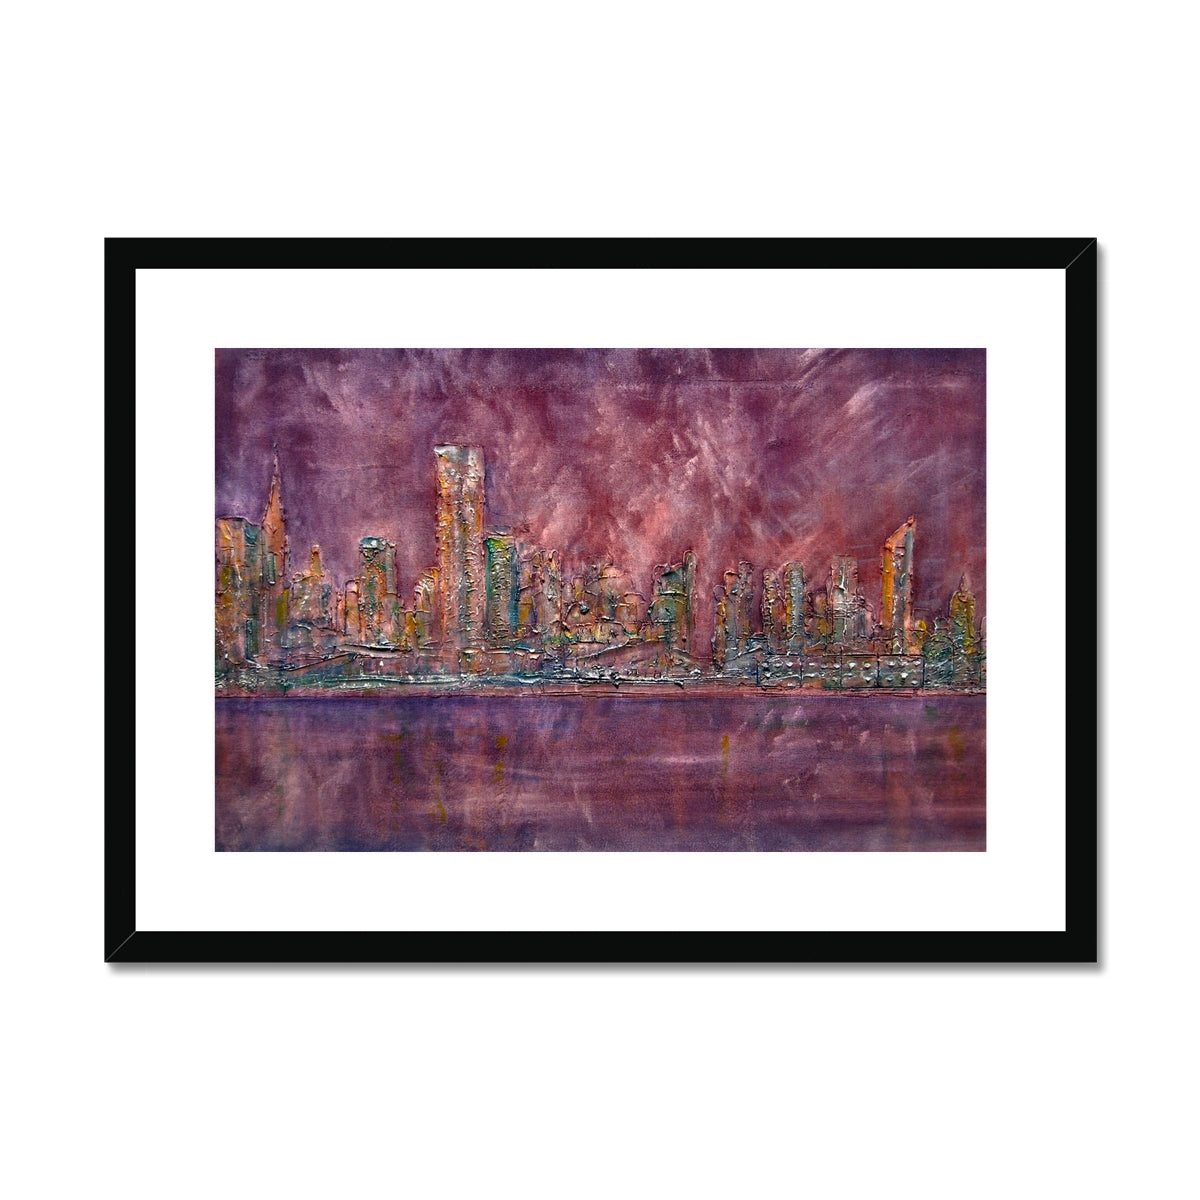 East Side Snow New York Painting | Framed & Mounted Prints From Scotland-Framed & Mounted Prints-World Art Gallery-A2 Landscape-Black Frame-Paintings, Prints, Homeware, Art Gifts From Scotland By Scottish Artist Kevin Hunter